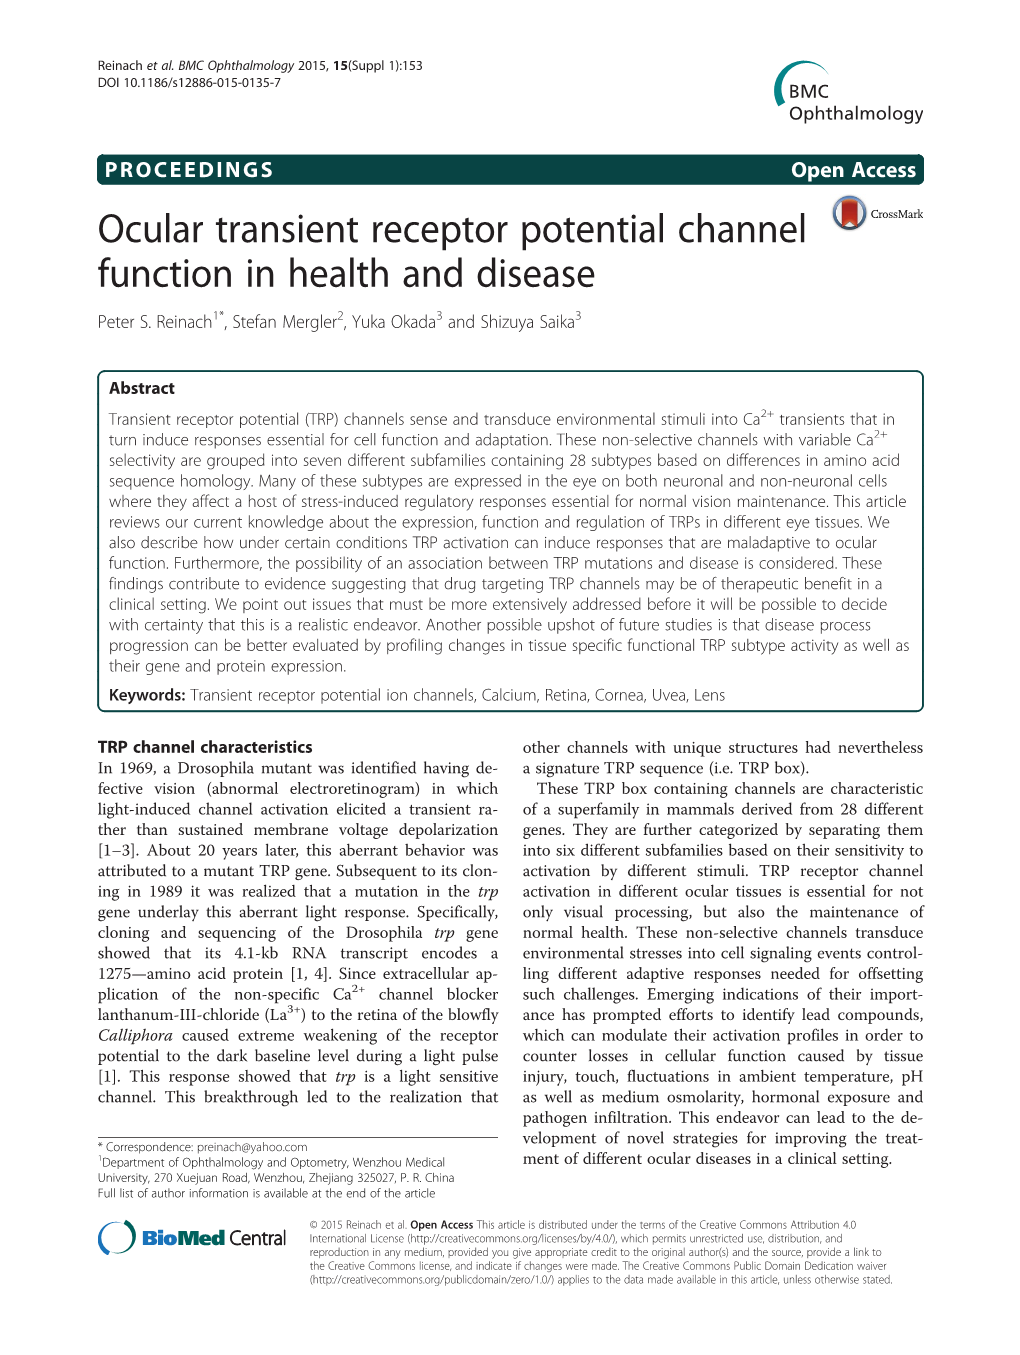 Ocular Transient Receptor Potential Channel Function in Health and Disease Peter S